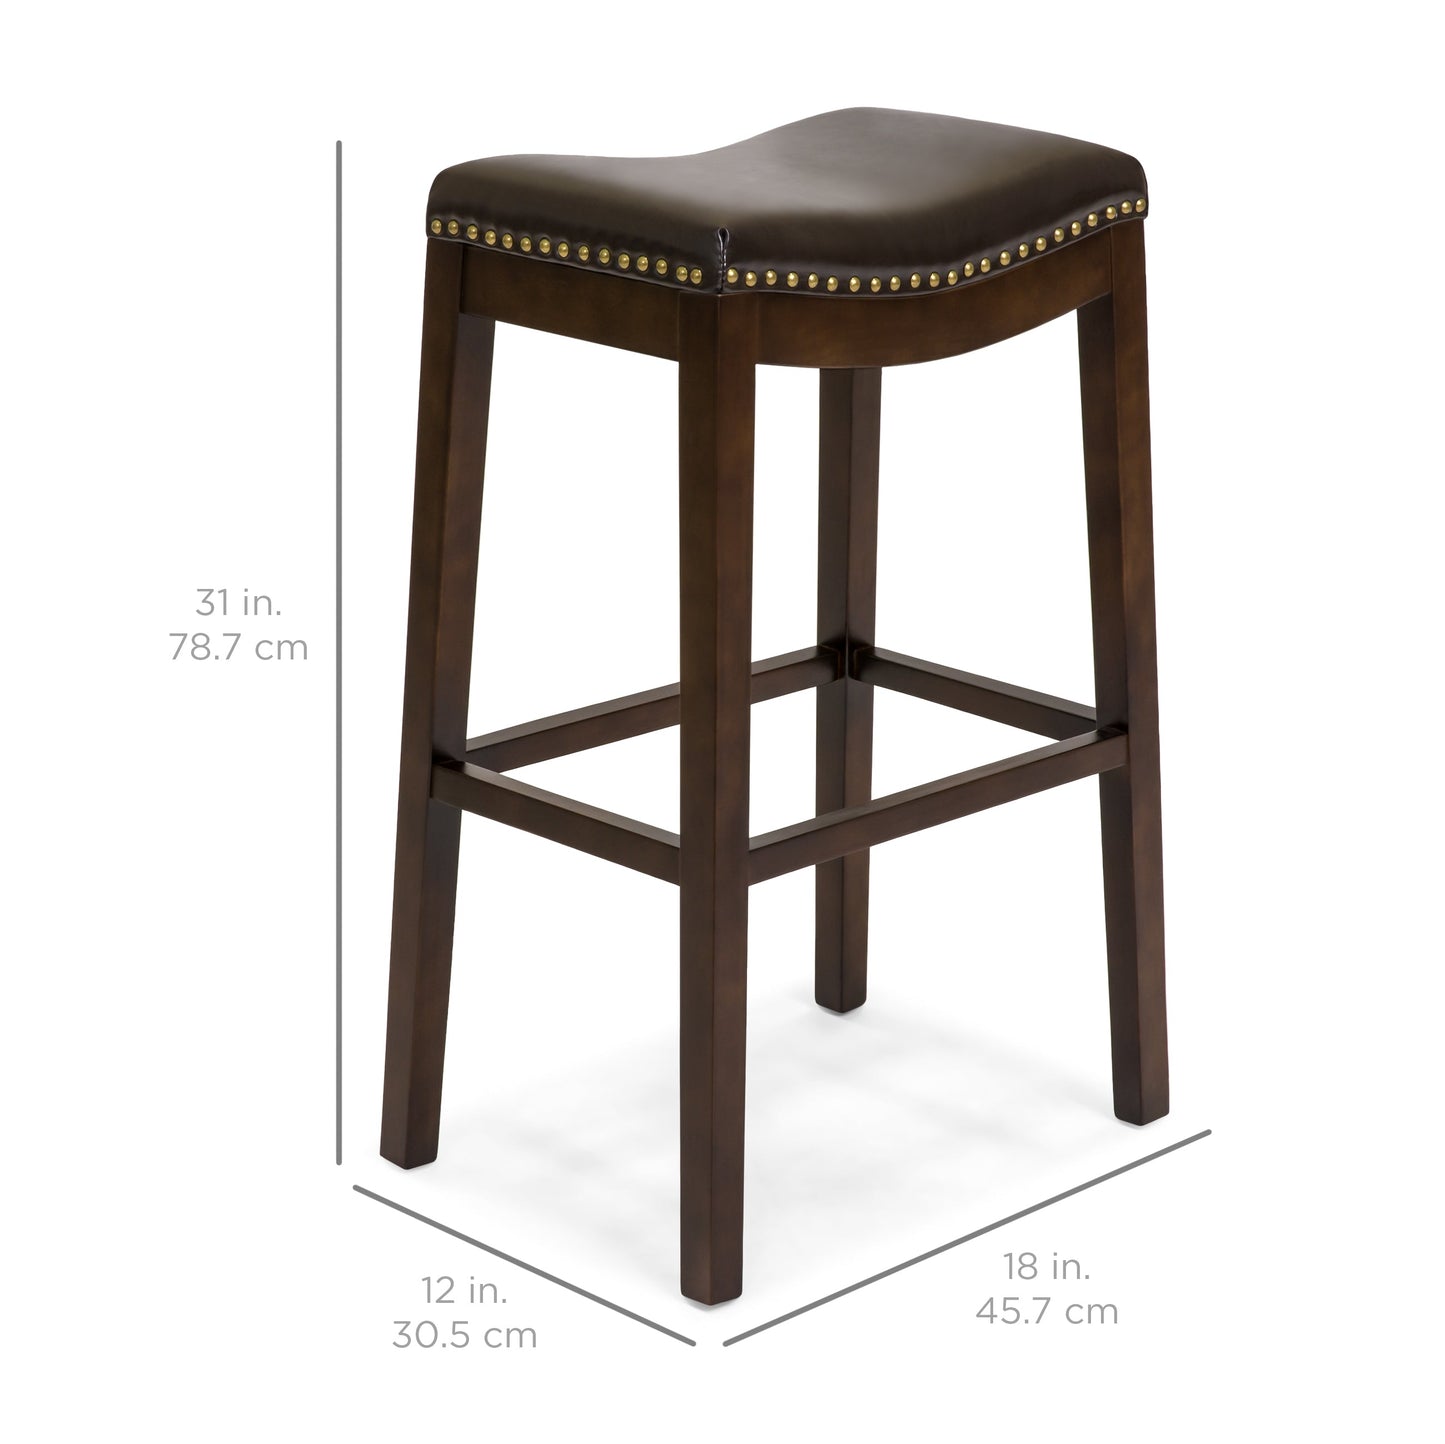 Set of 2 31in Backless Bar Stool Accent Chairs w/ Faux Leather, Brass Studs